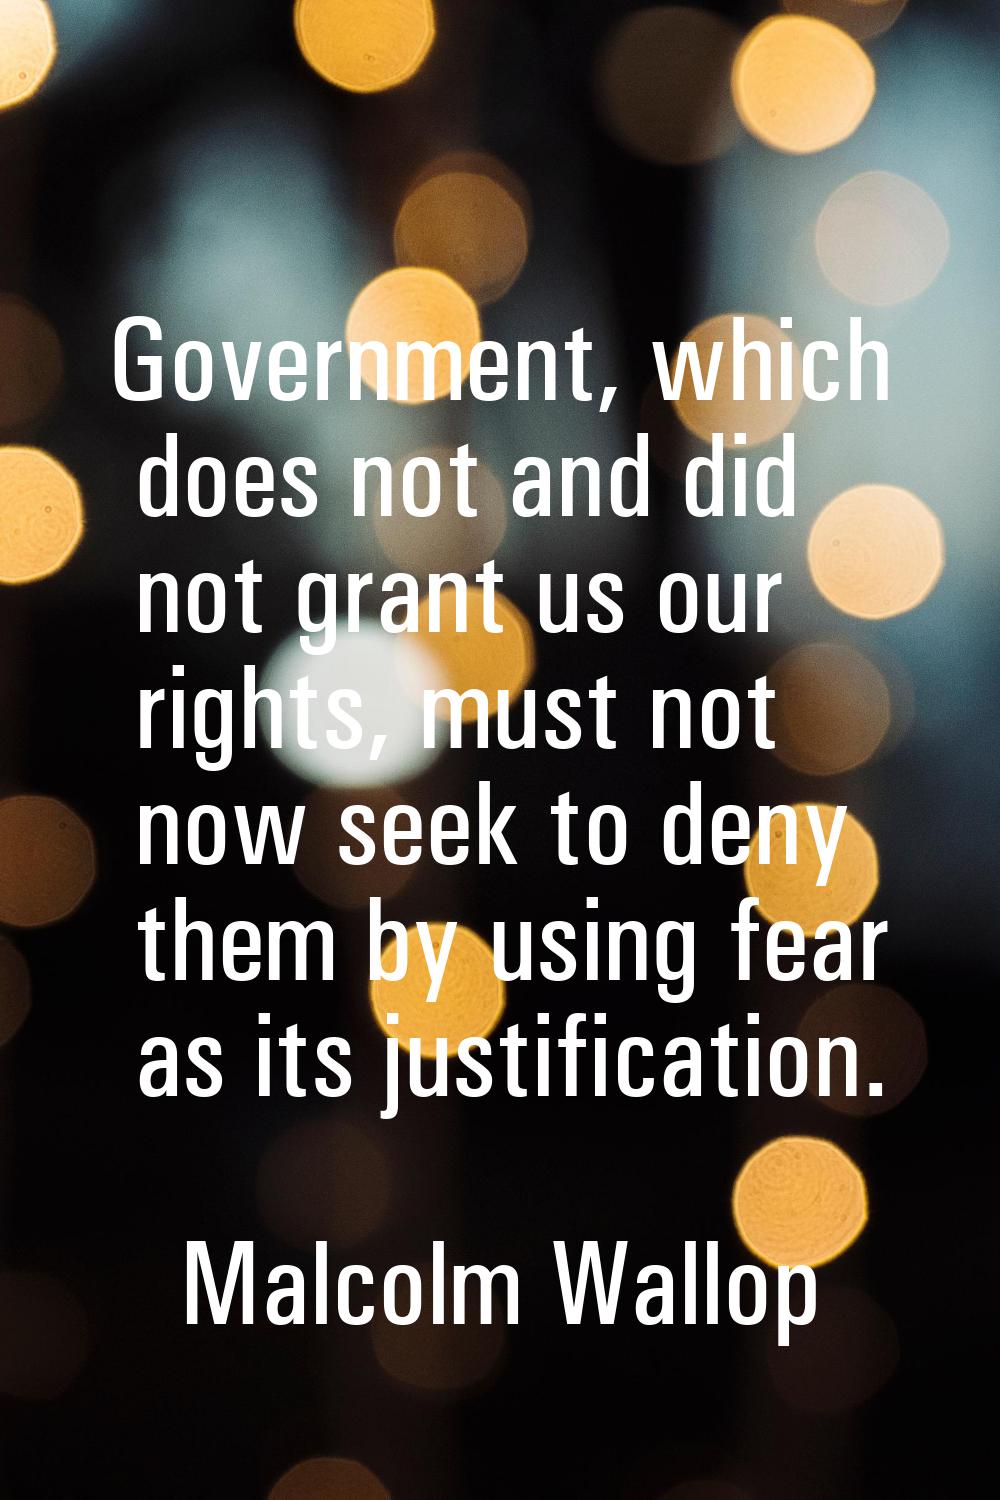 Government, which does not and did not grant us our rights, must not now seek to deny them by using